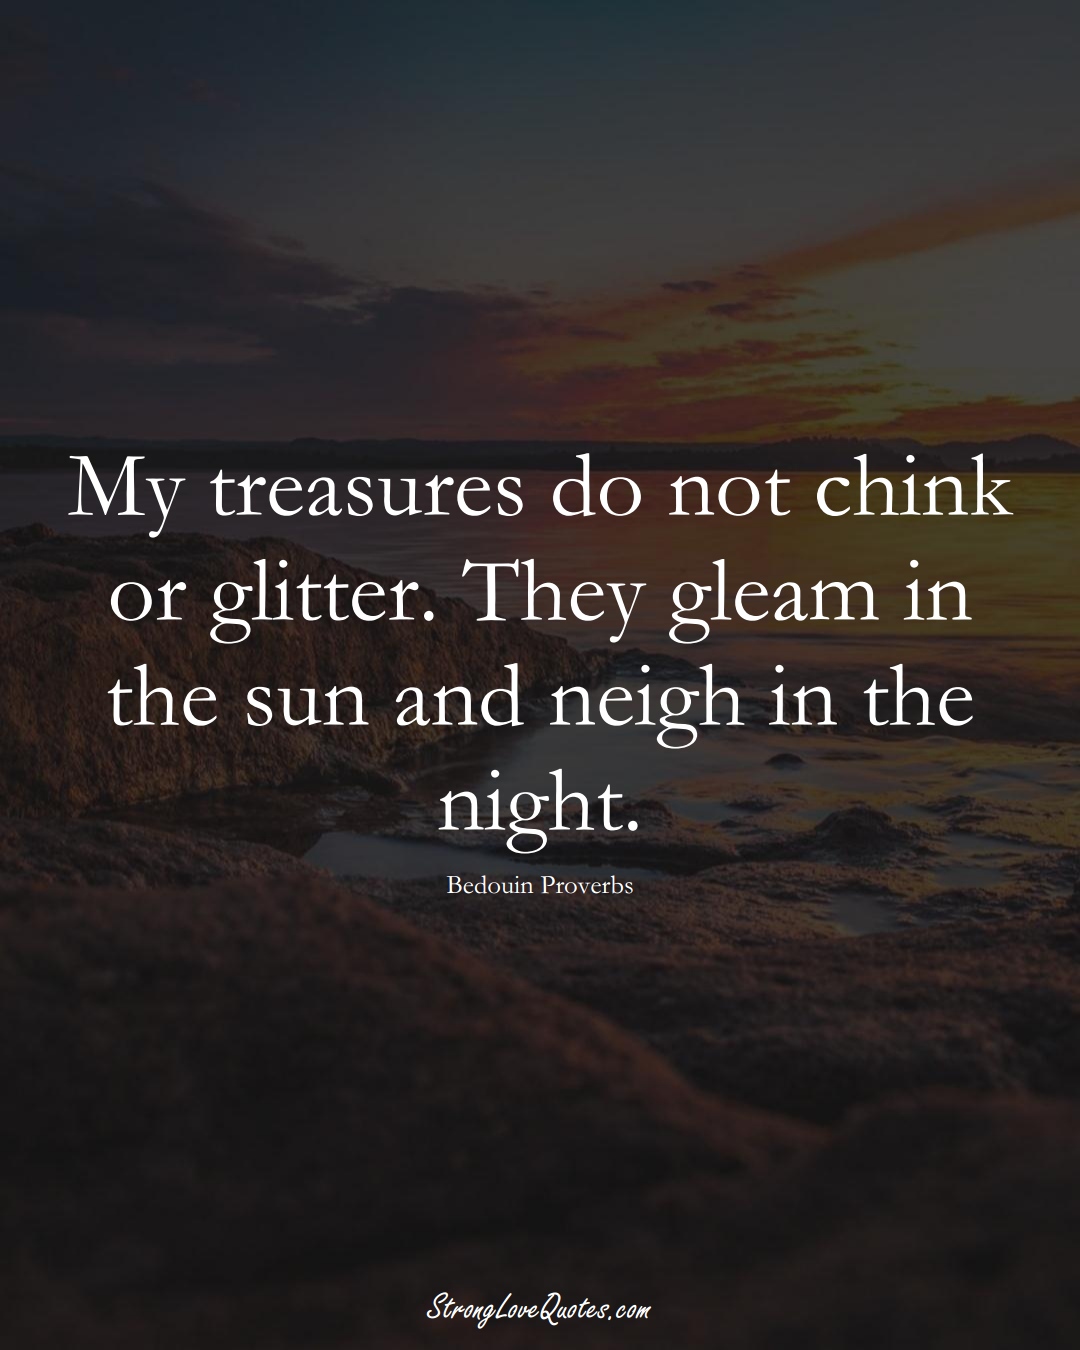 My treasures do not chink or glitter. They gleam in the sun and neigh in the night. (Bedouin Sayings);  #aVarietyofCulturesSayings